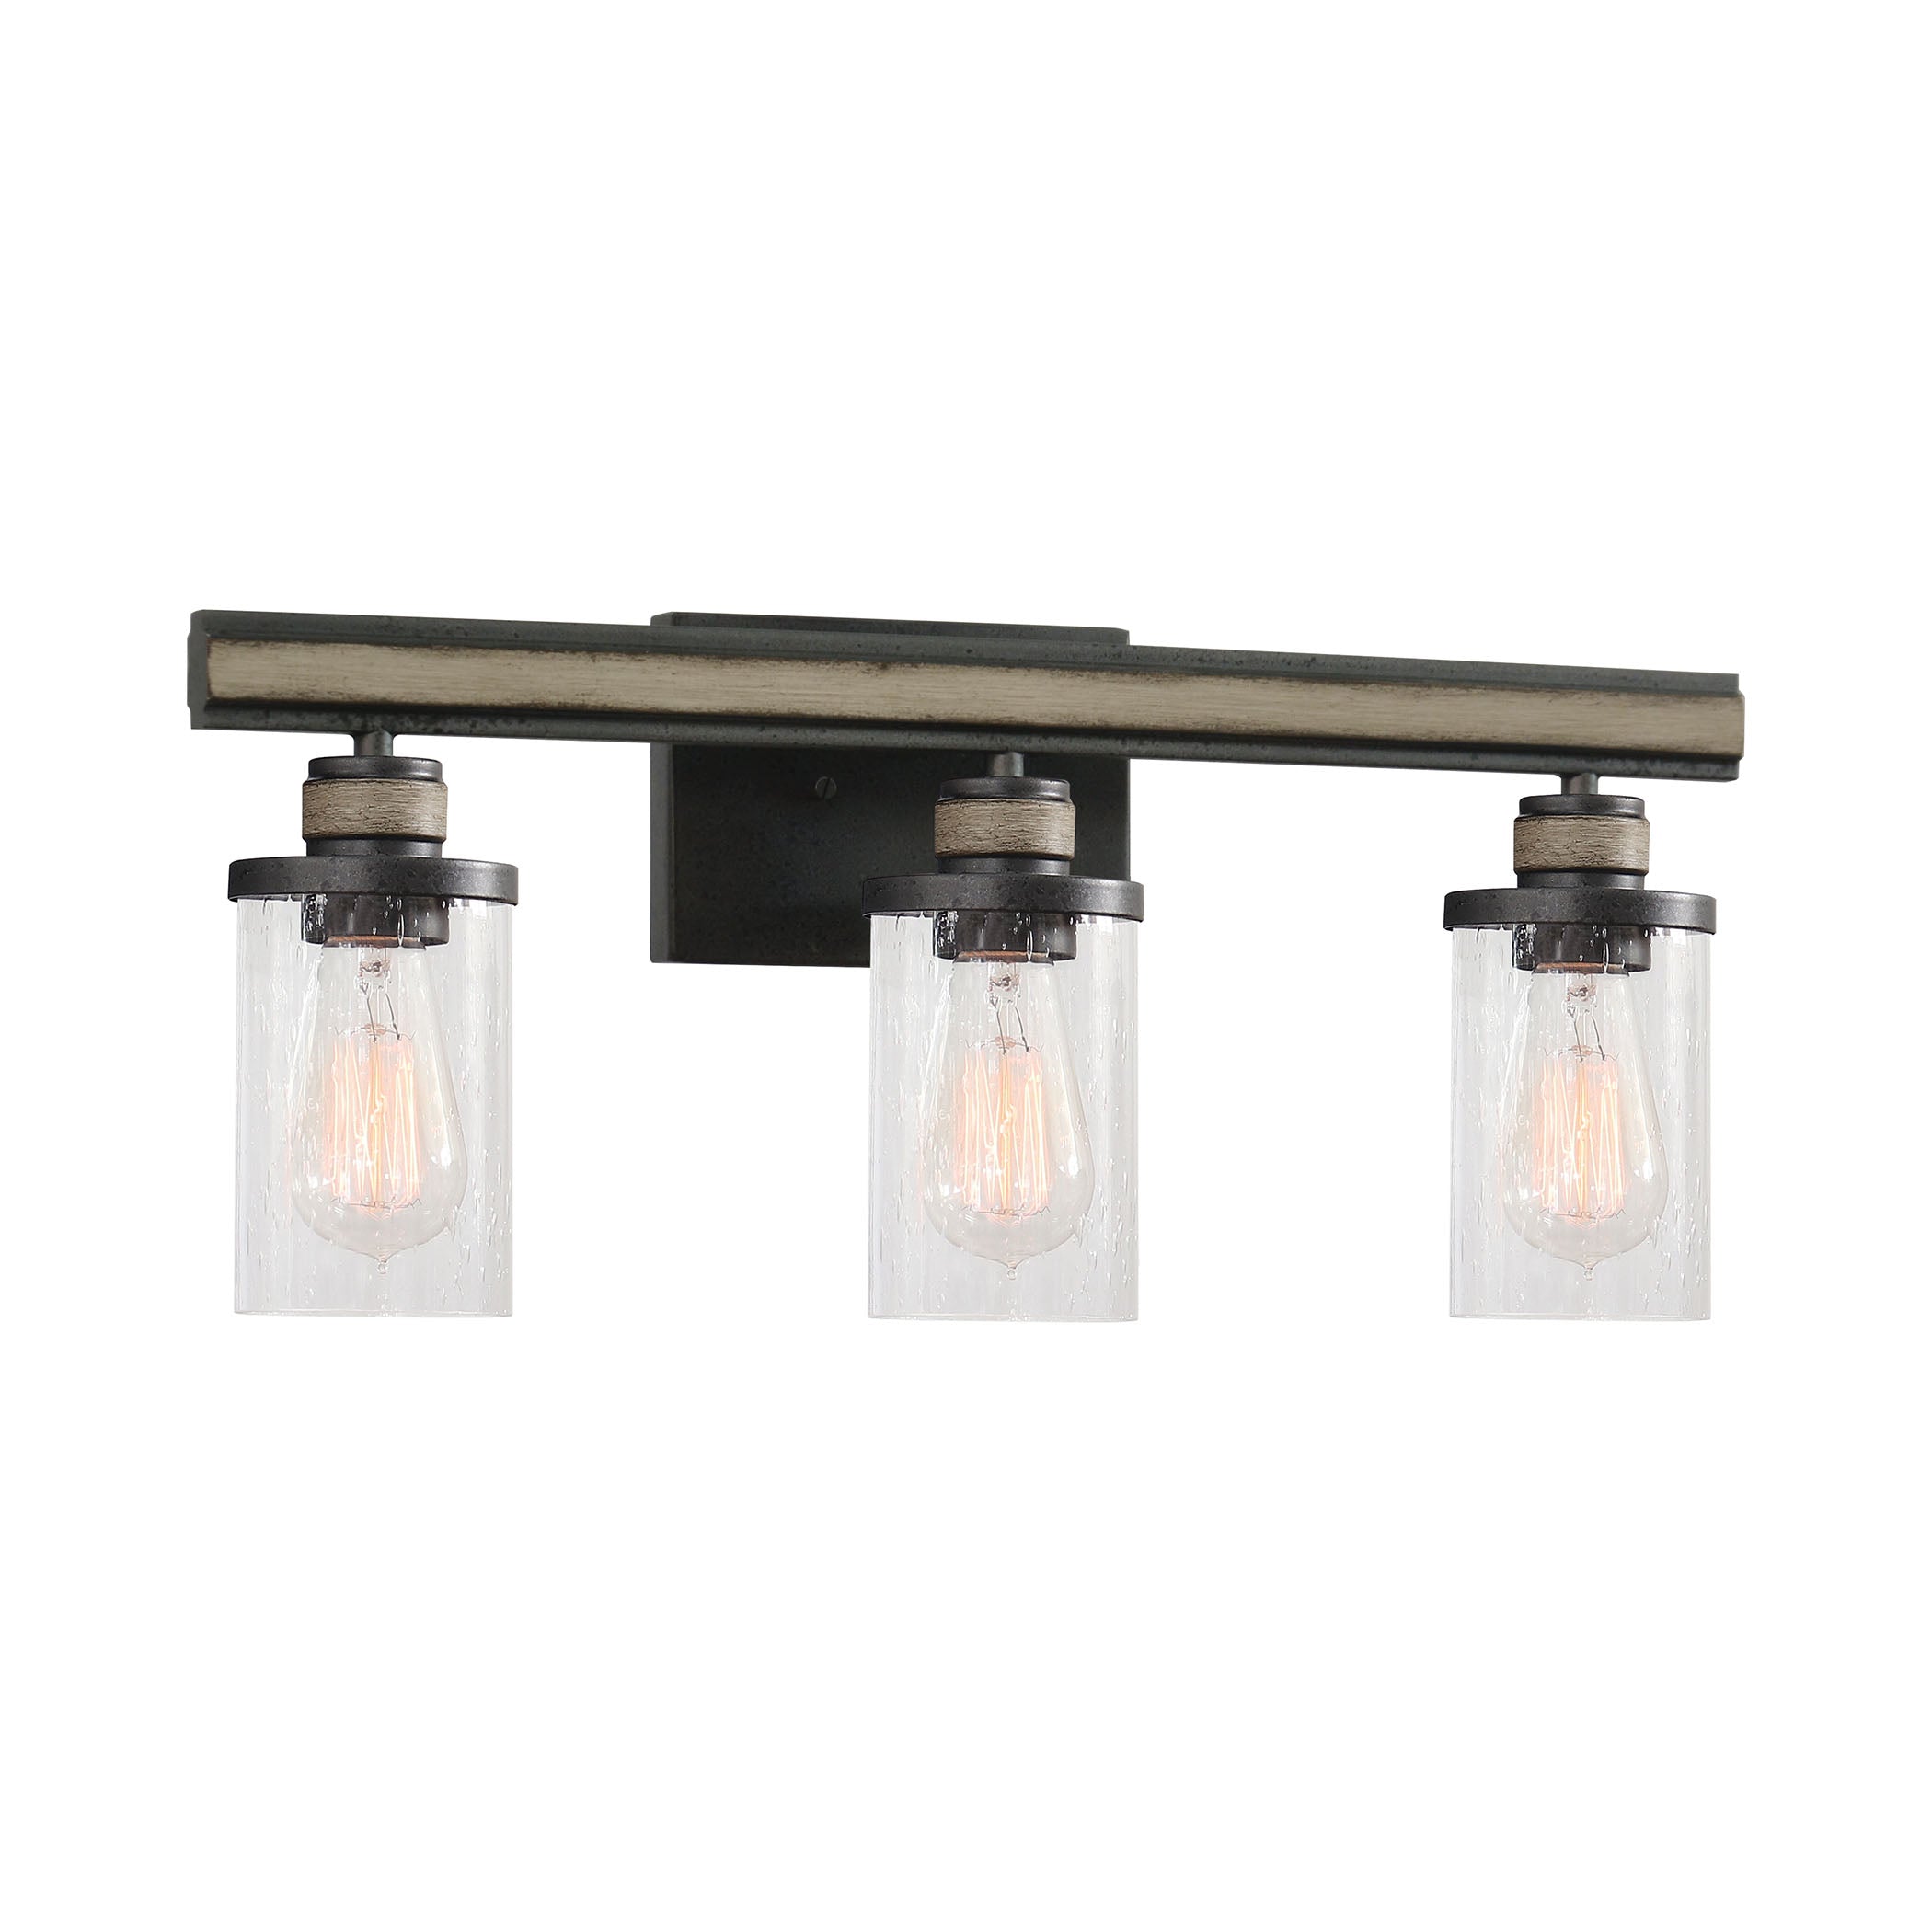 ELK Lighting 89154/3 Beaufort 3-Light Vanity Light in Anvil Iron and Distressed Antique Graywood with Seedy Glass